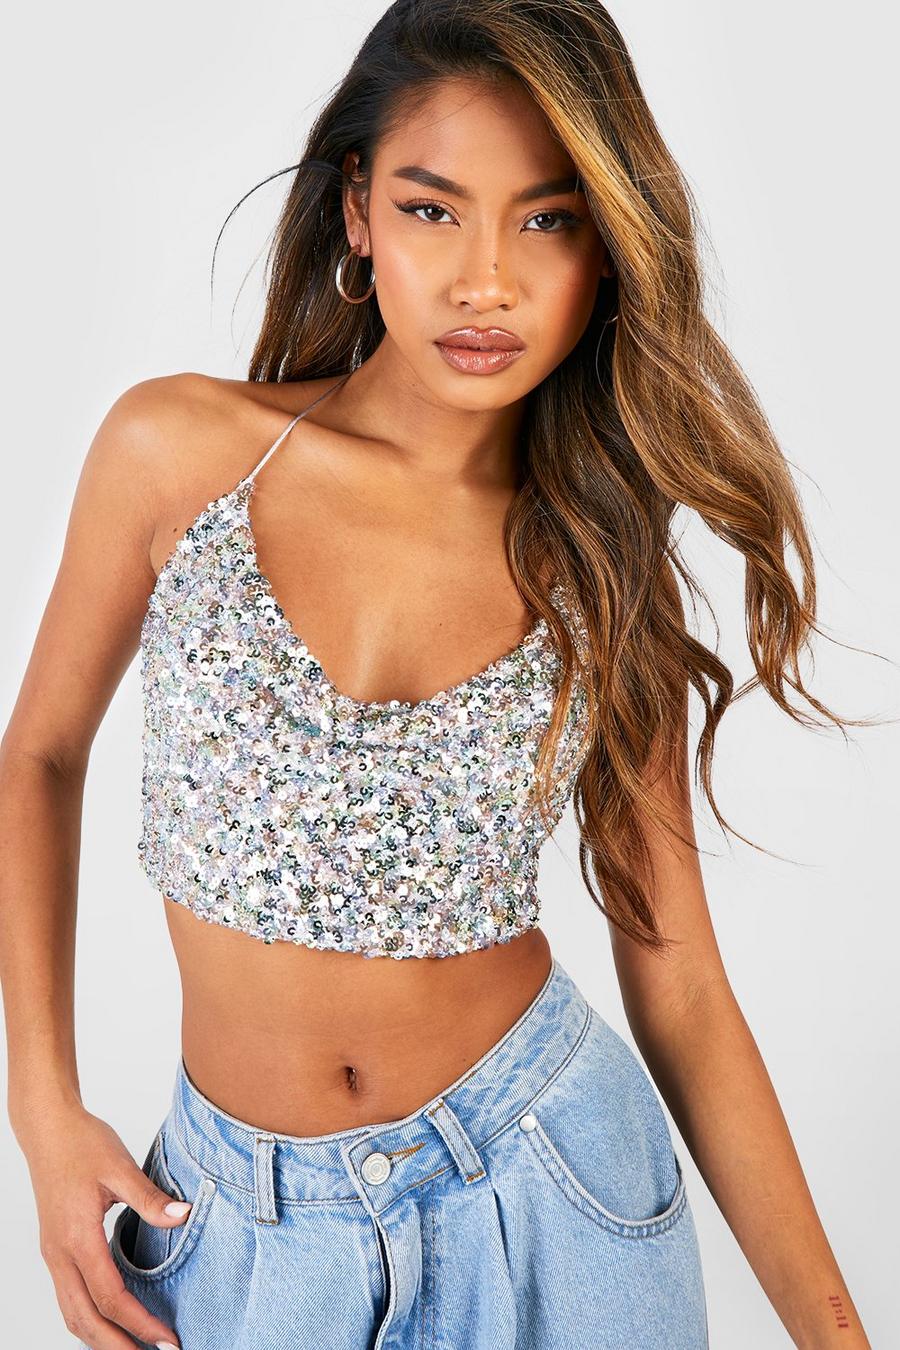 narre Atomisk Abundantly Sequin Tops for Women | Glitter & Sparkly Tops | boohoo USA